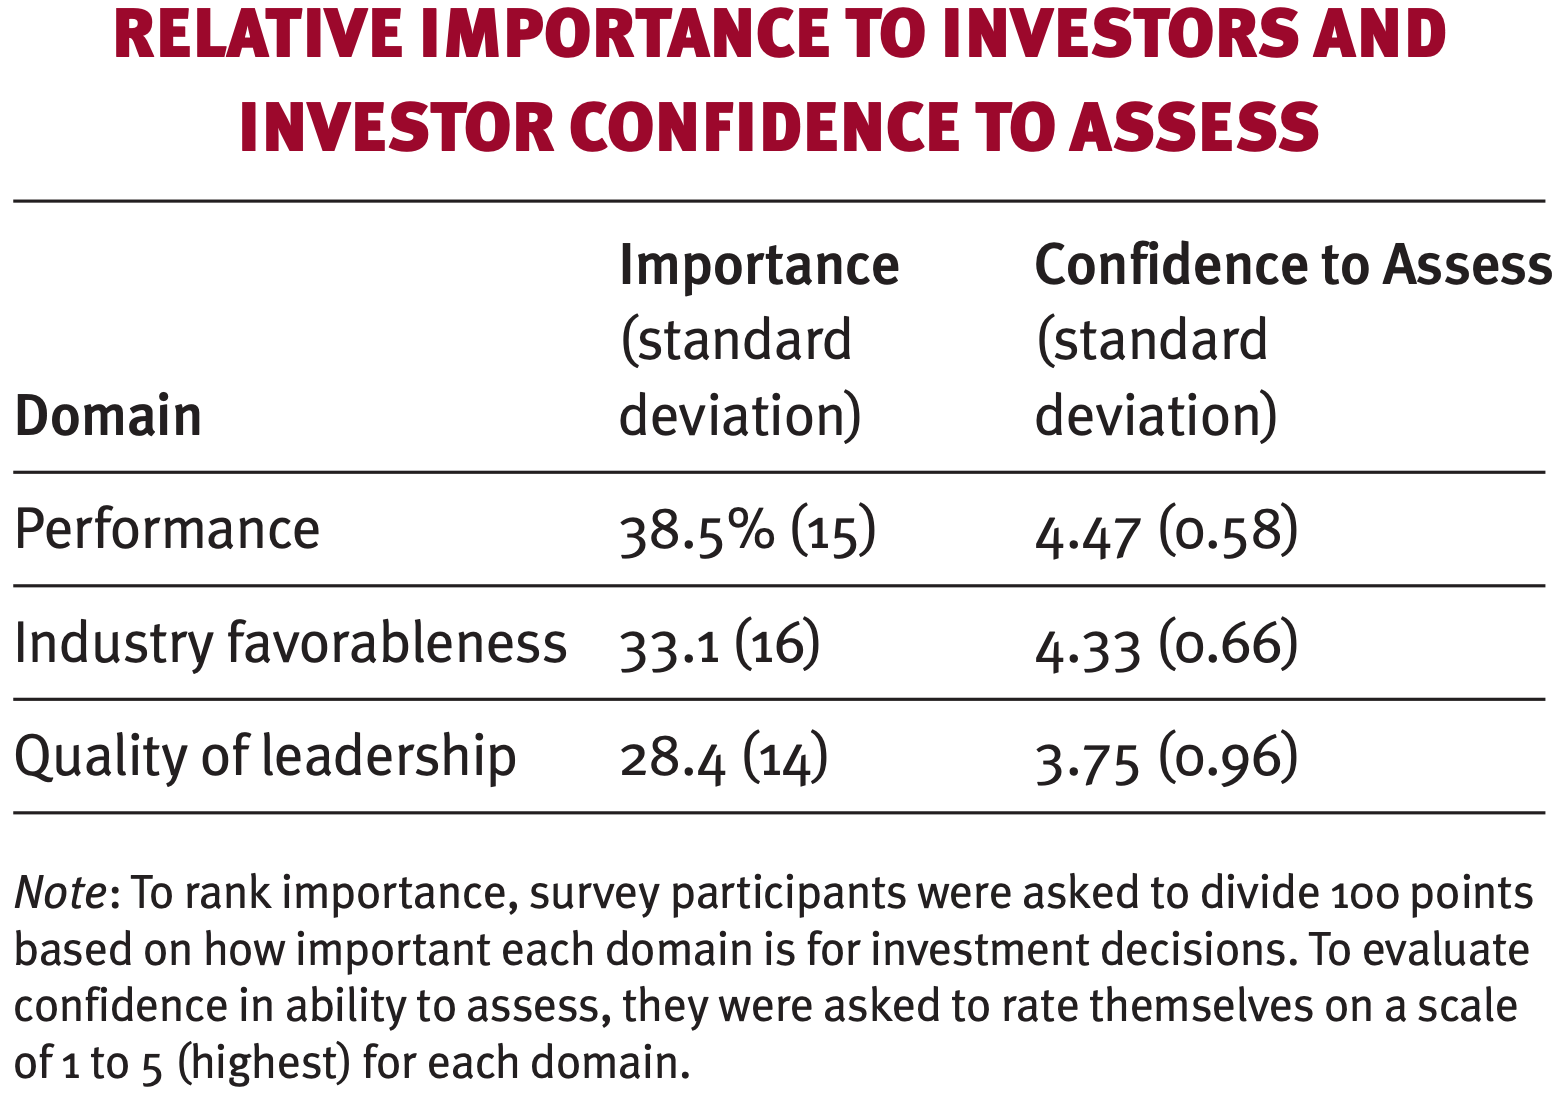 Relative importance to investors and investor confidence to assess 